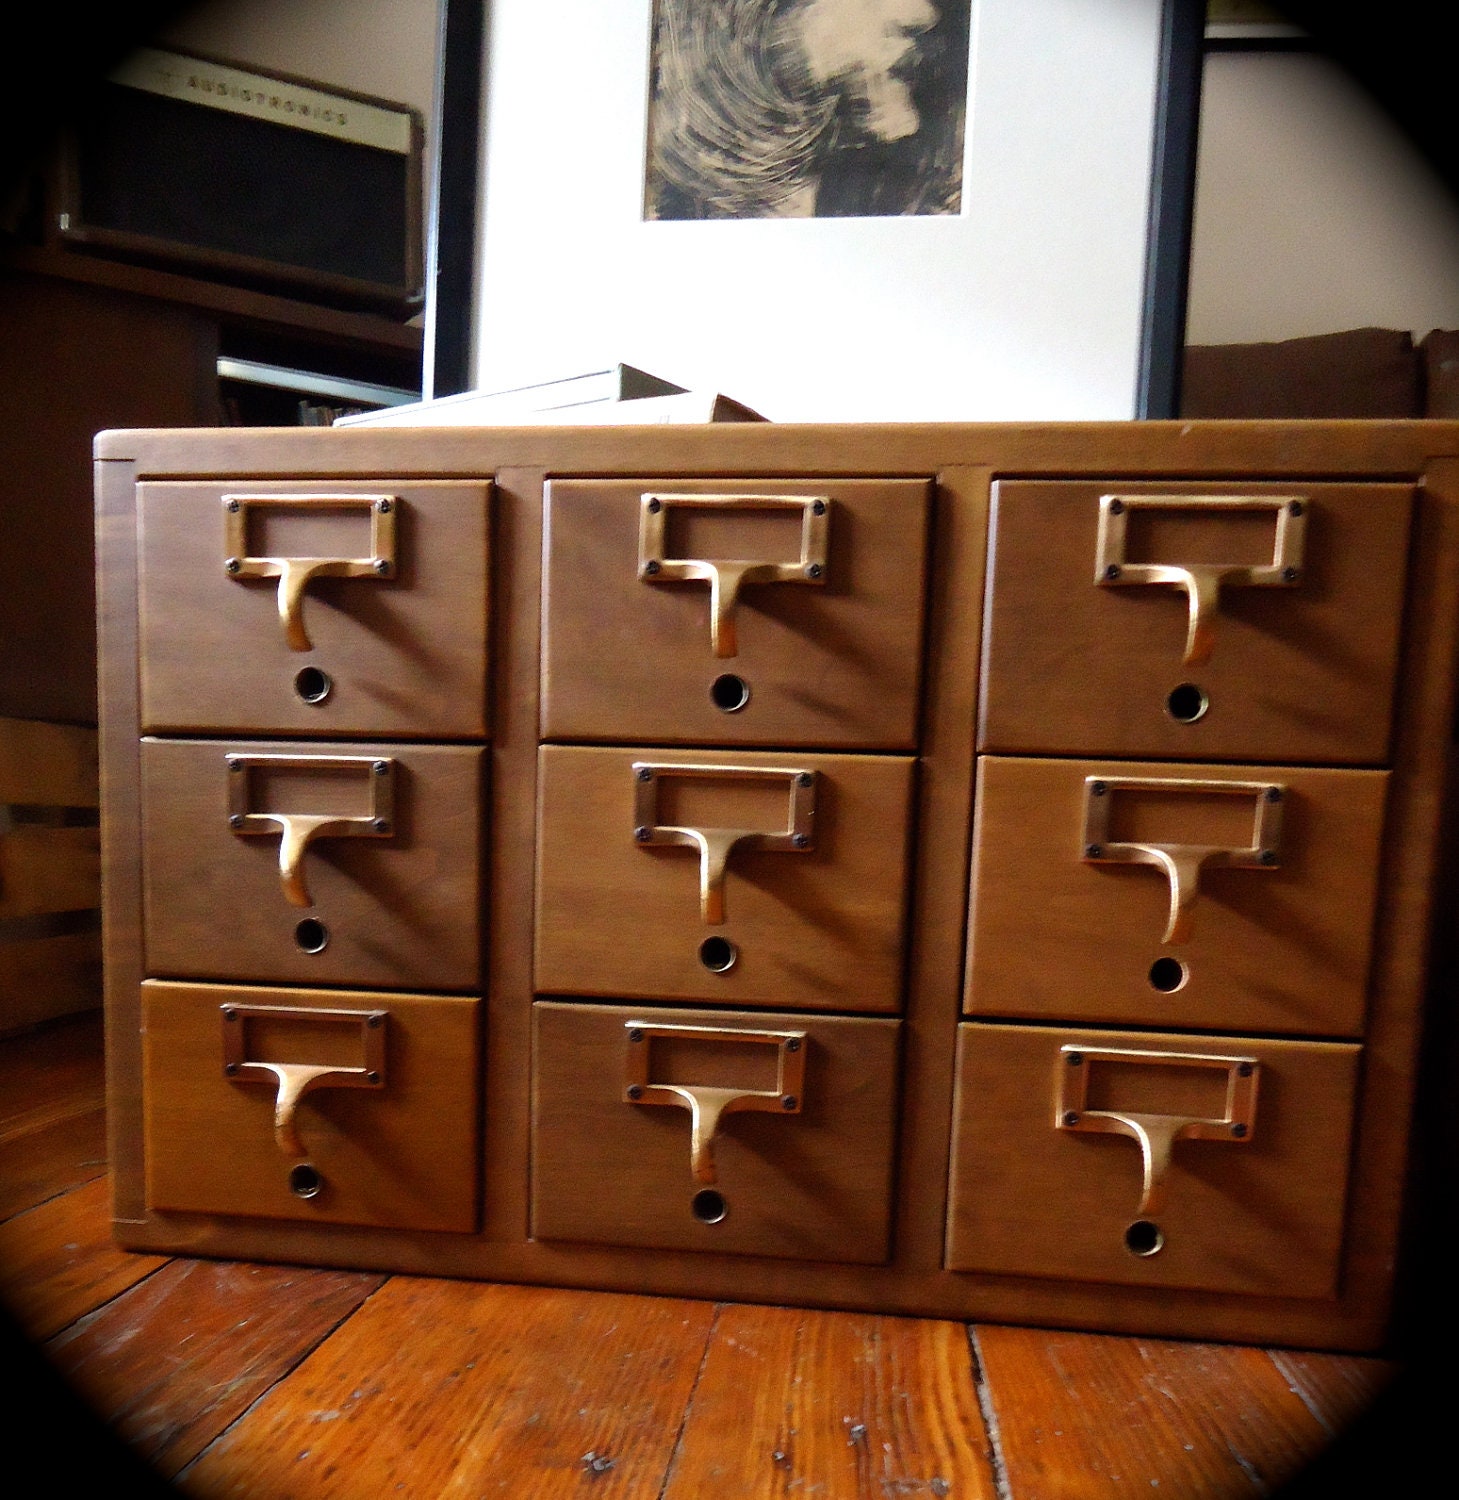 VidaliasVintage  library cabinets File by Card vintage Library Catalog Vintage Cabinet